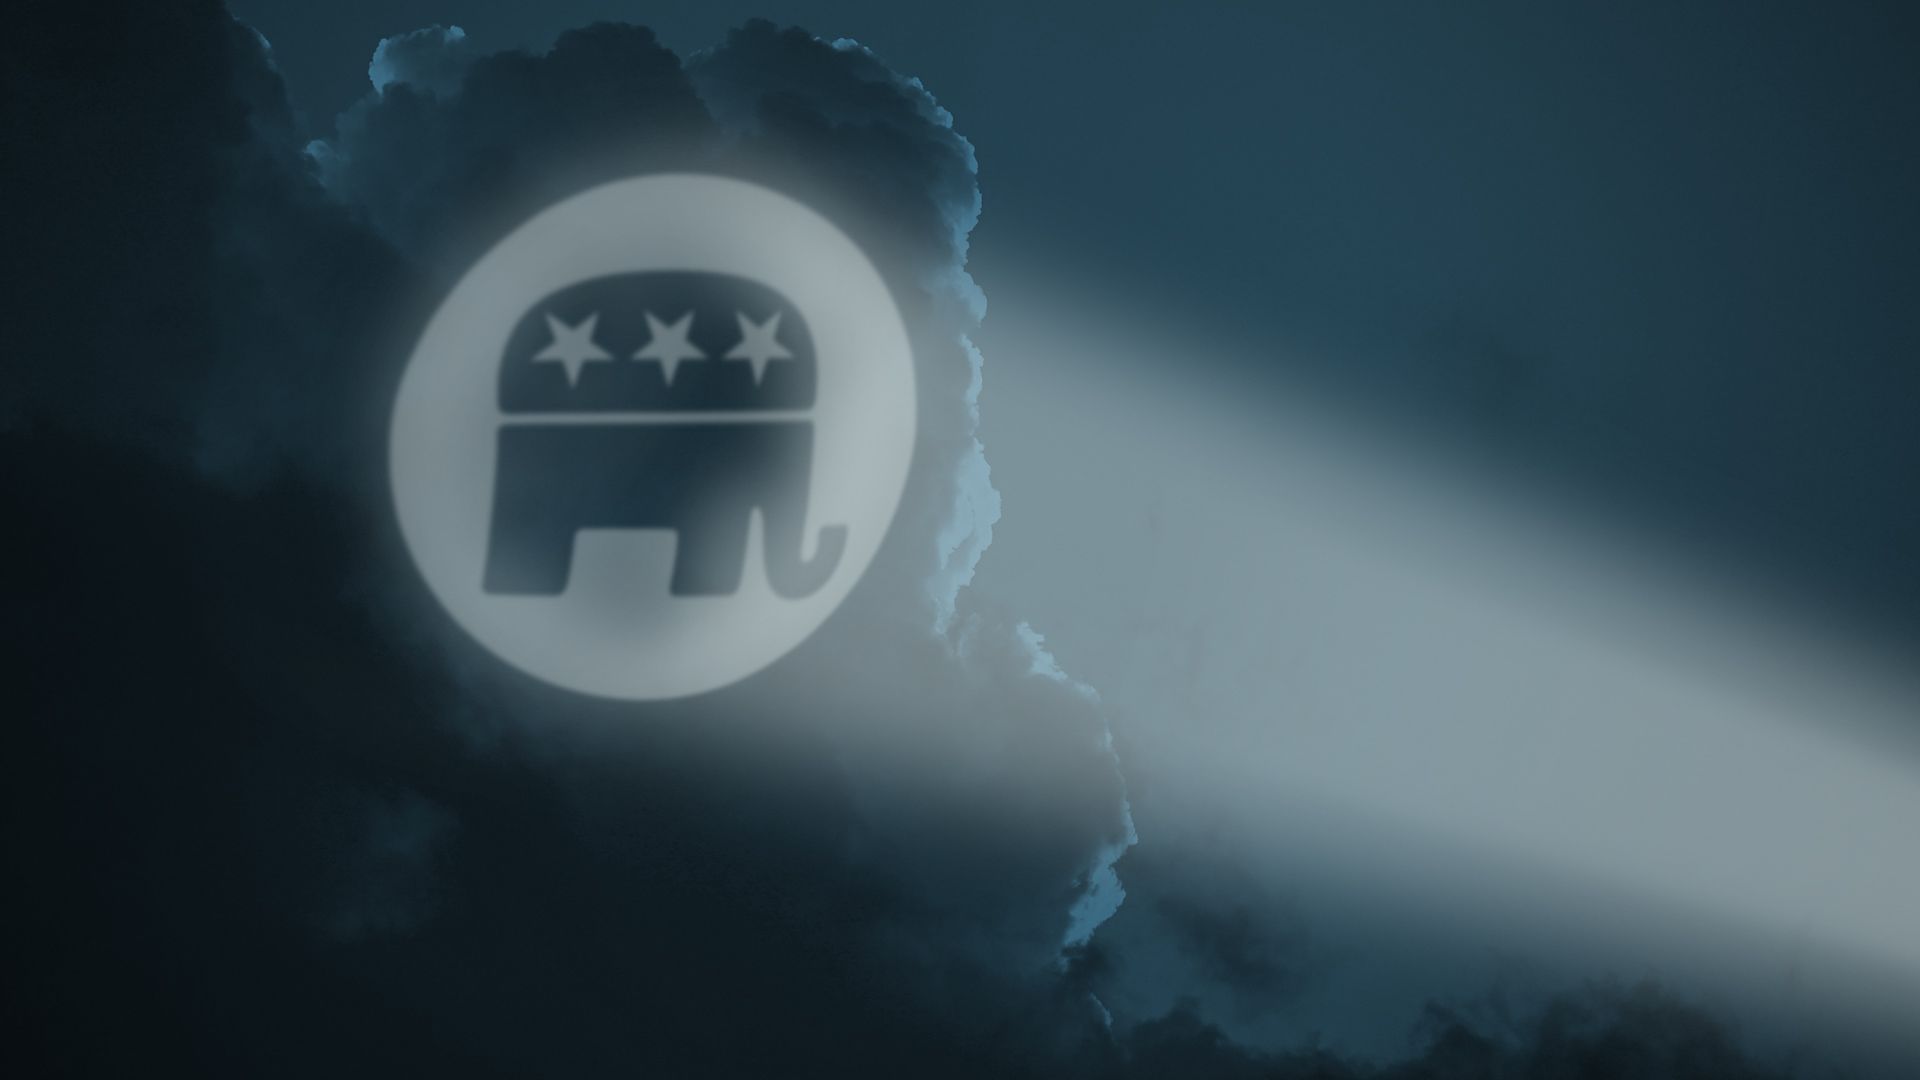 Illustration of dark clouds with a spotlight like a batsignal shining on them, with the Republican elephant logo in it.